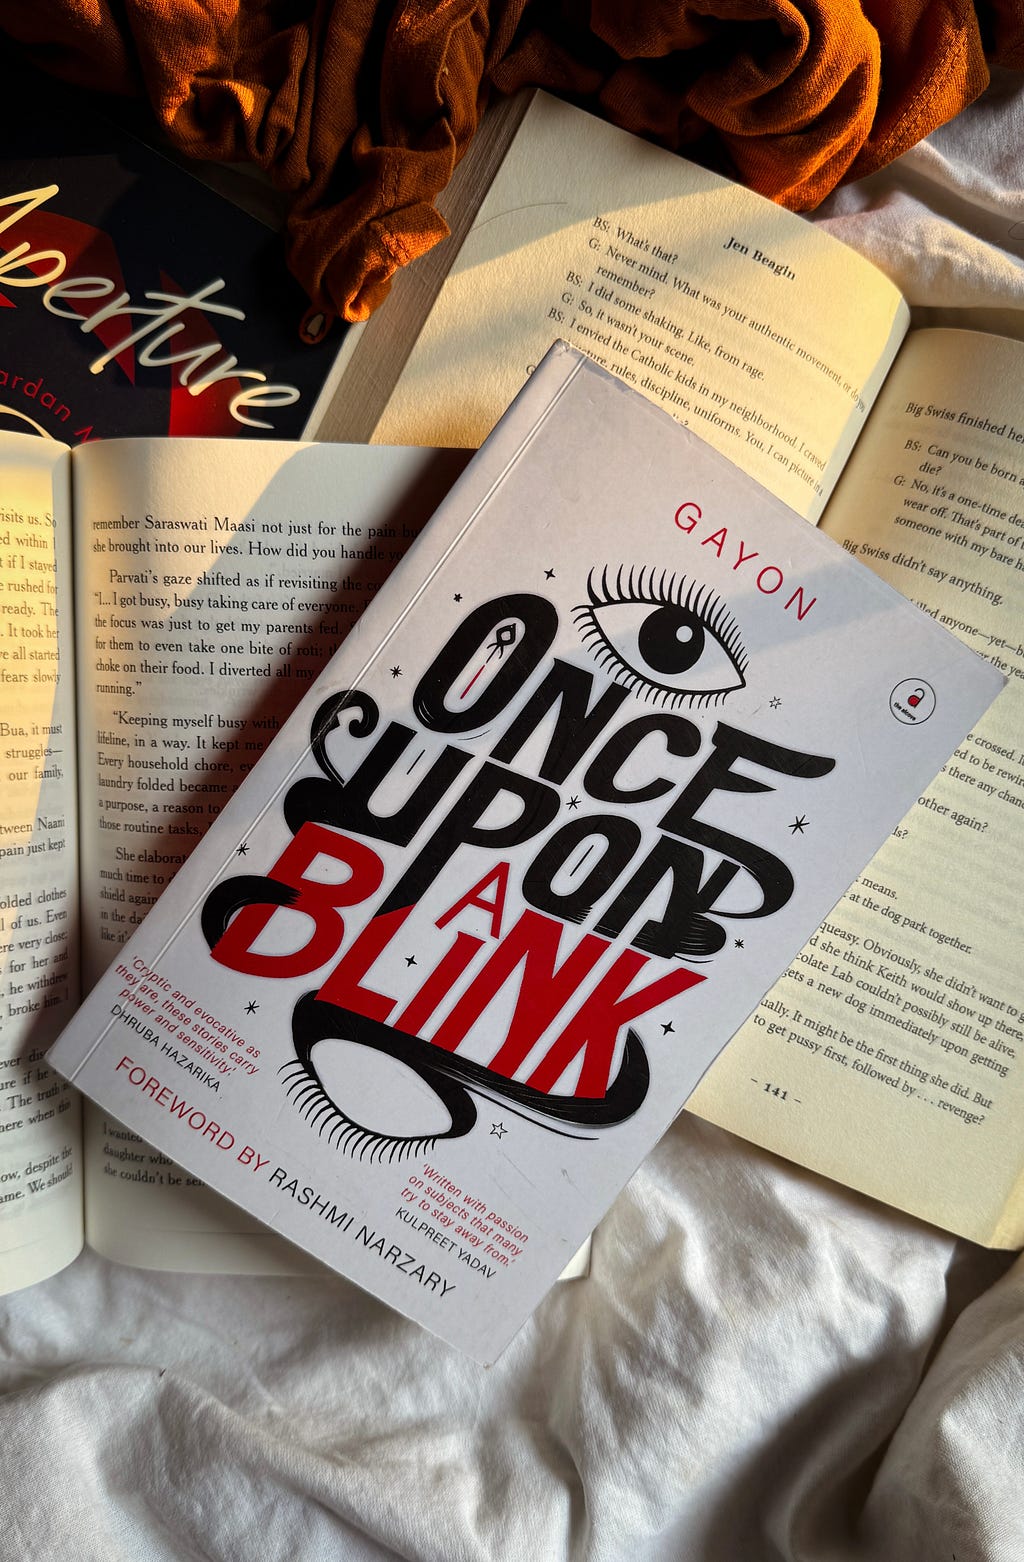 Unapologetic Life Truth and Tiny Tales: A Review of “Once Upon a Blink” by Pujith Gayon